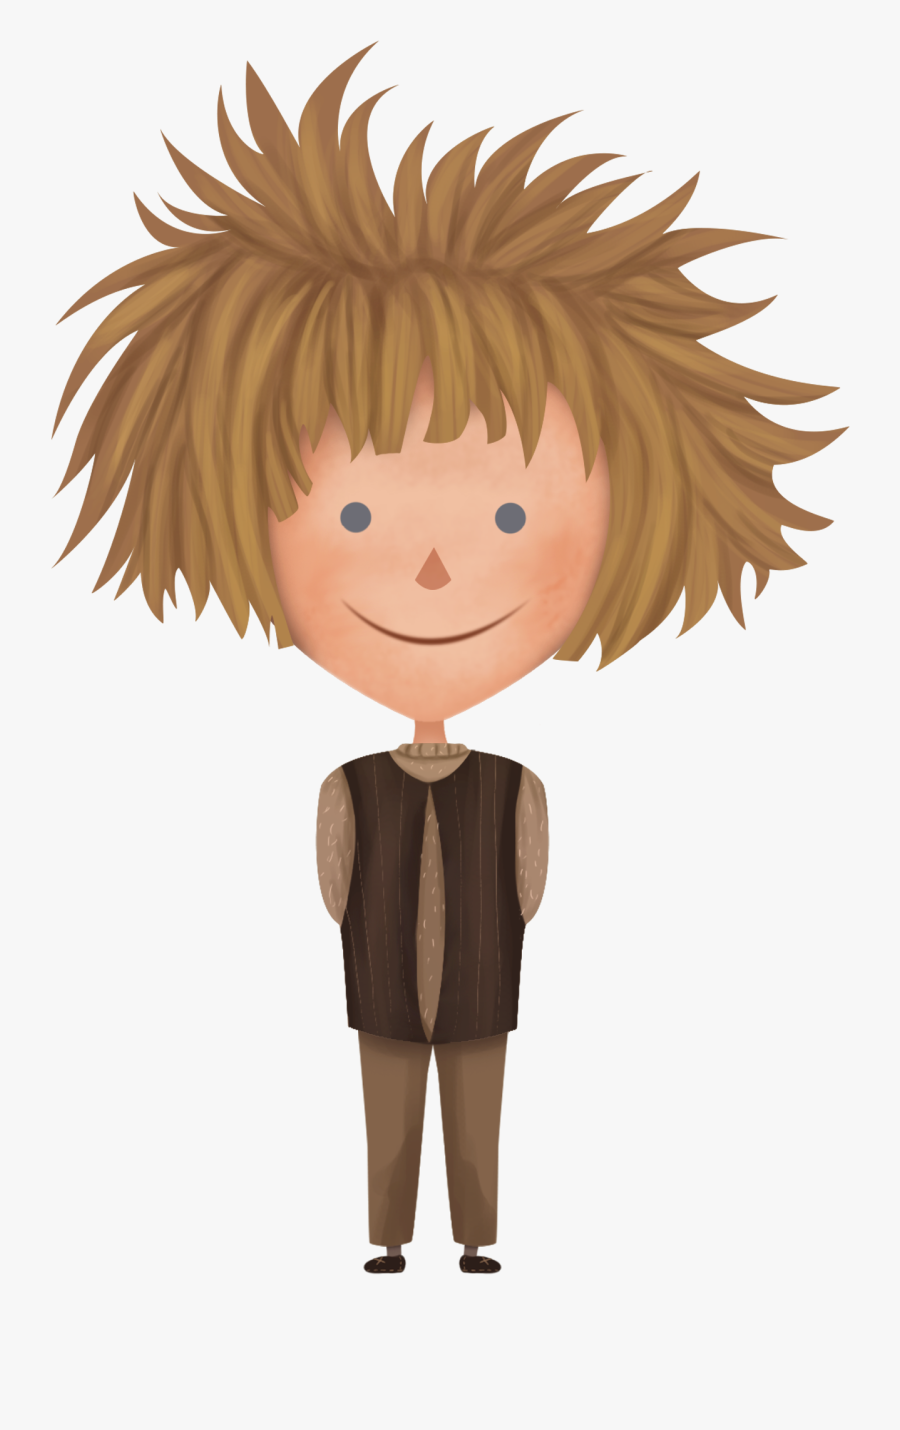 Boy With Messy Hair Clipart, Transparent Clipart